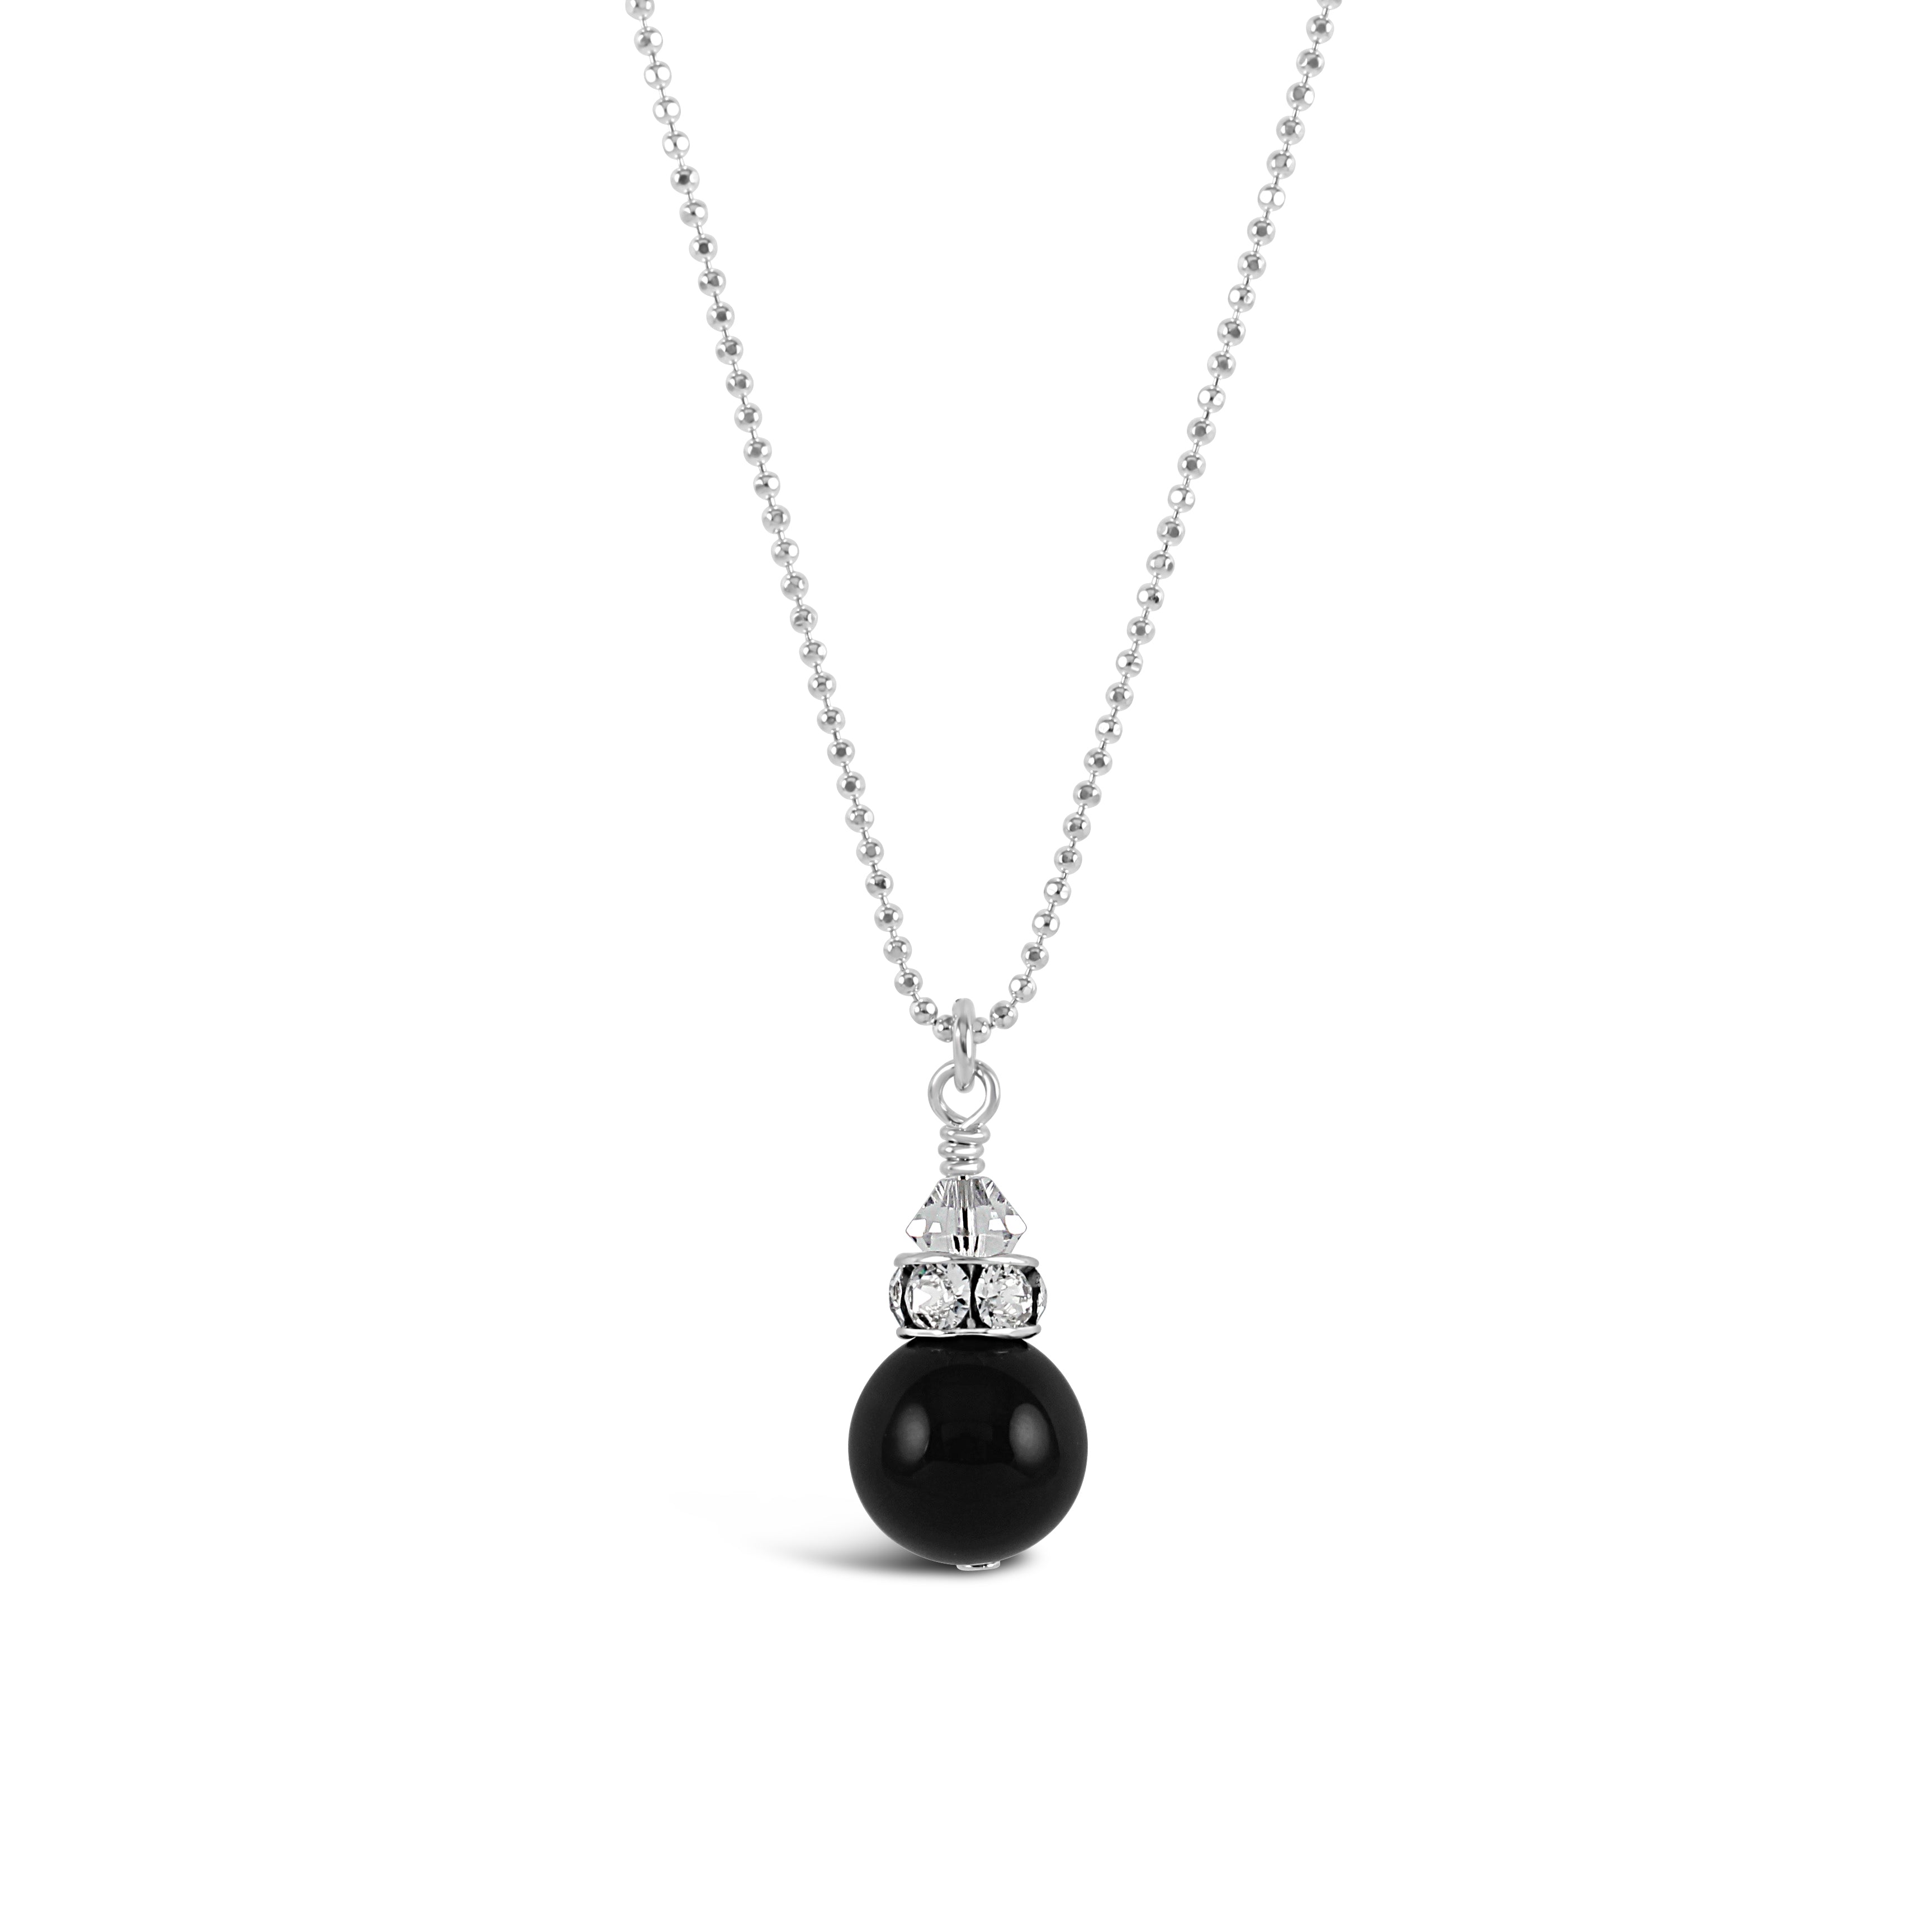 Classical Petite Luxe Necklace (Black Onyx)